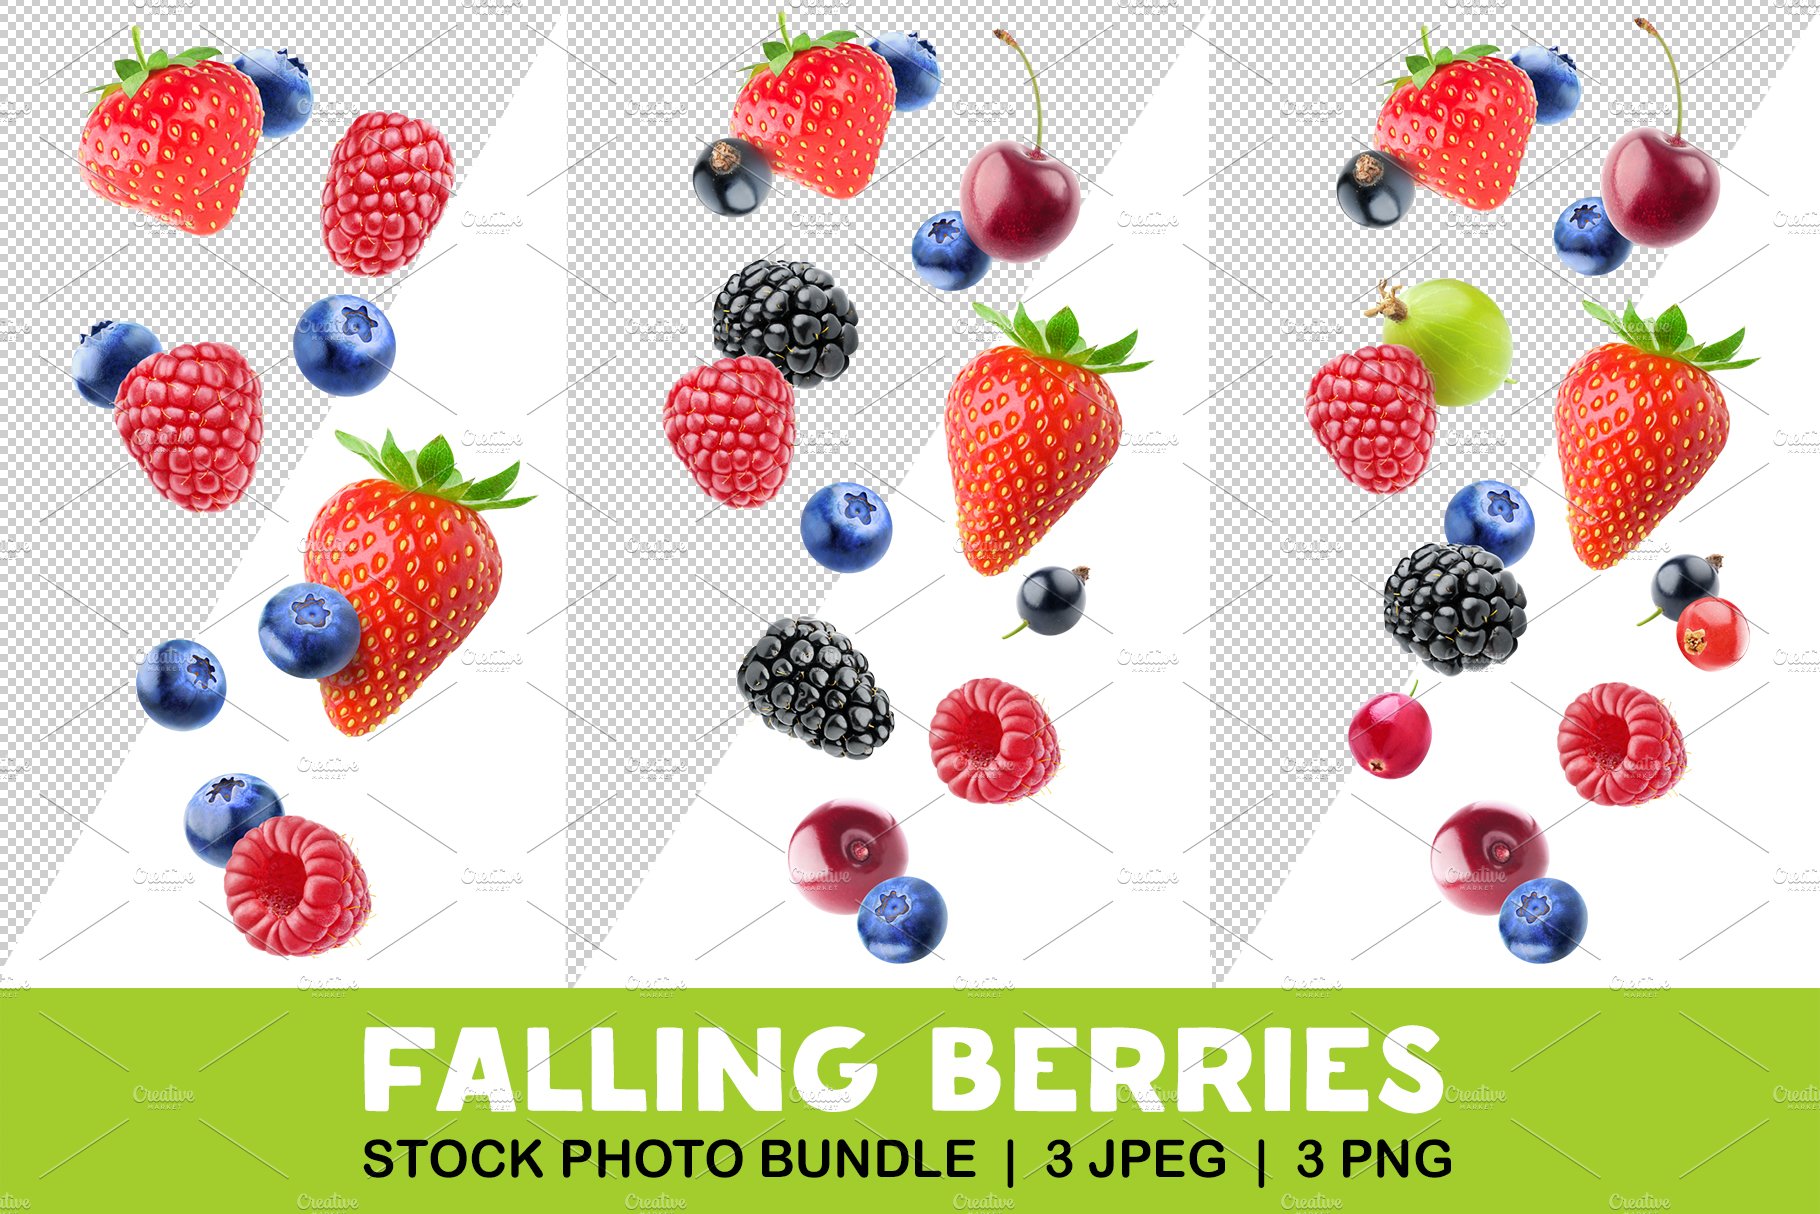 Flying berries cover image.